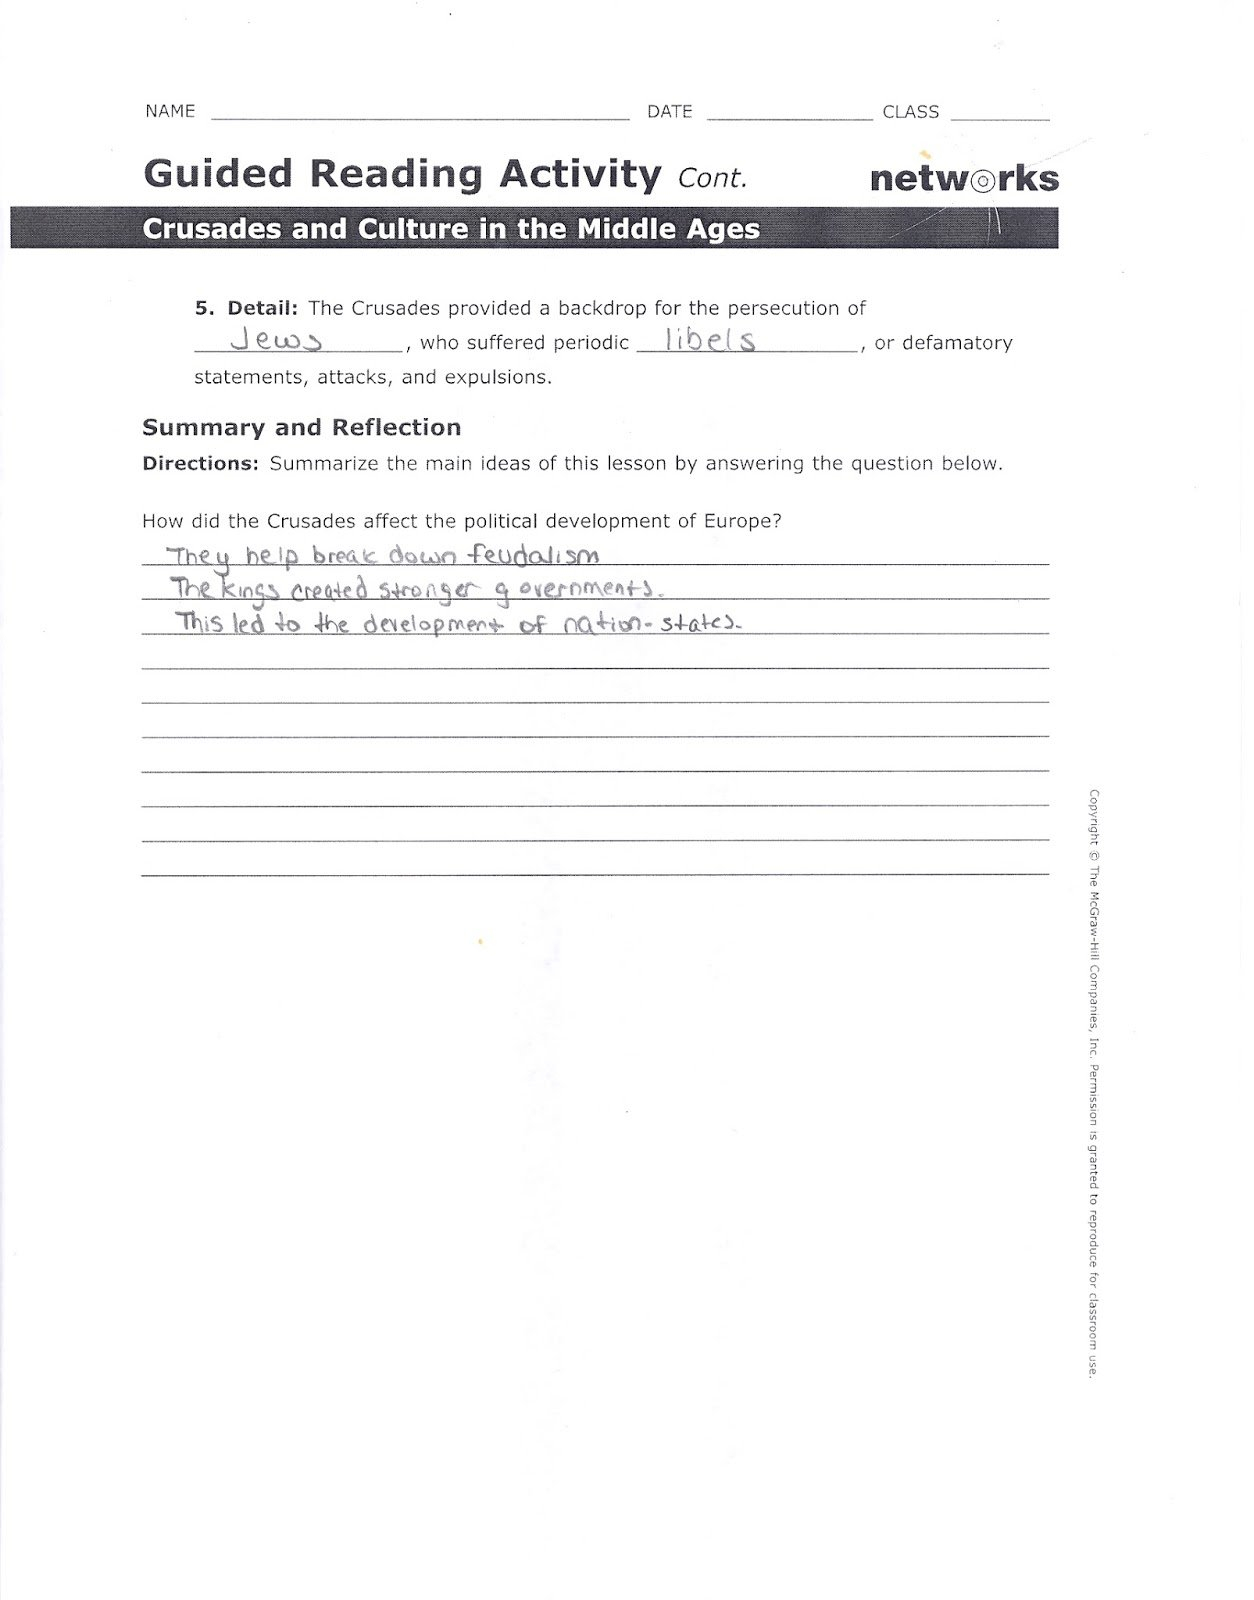 Crusades And Culture In The Middle Ages Worksheet Answers  Yooob Inside Crusades And Culture In The Middle Ages Worksheet Answers